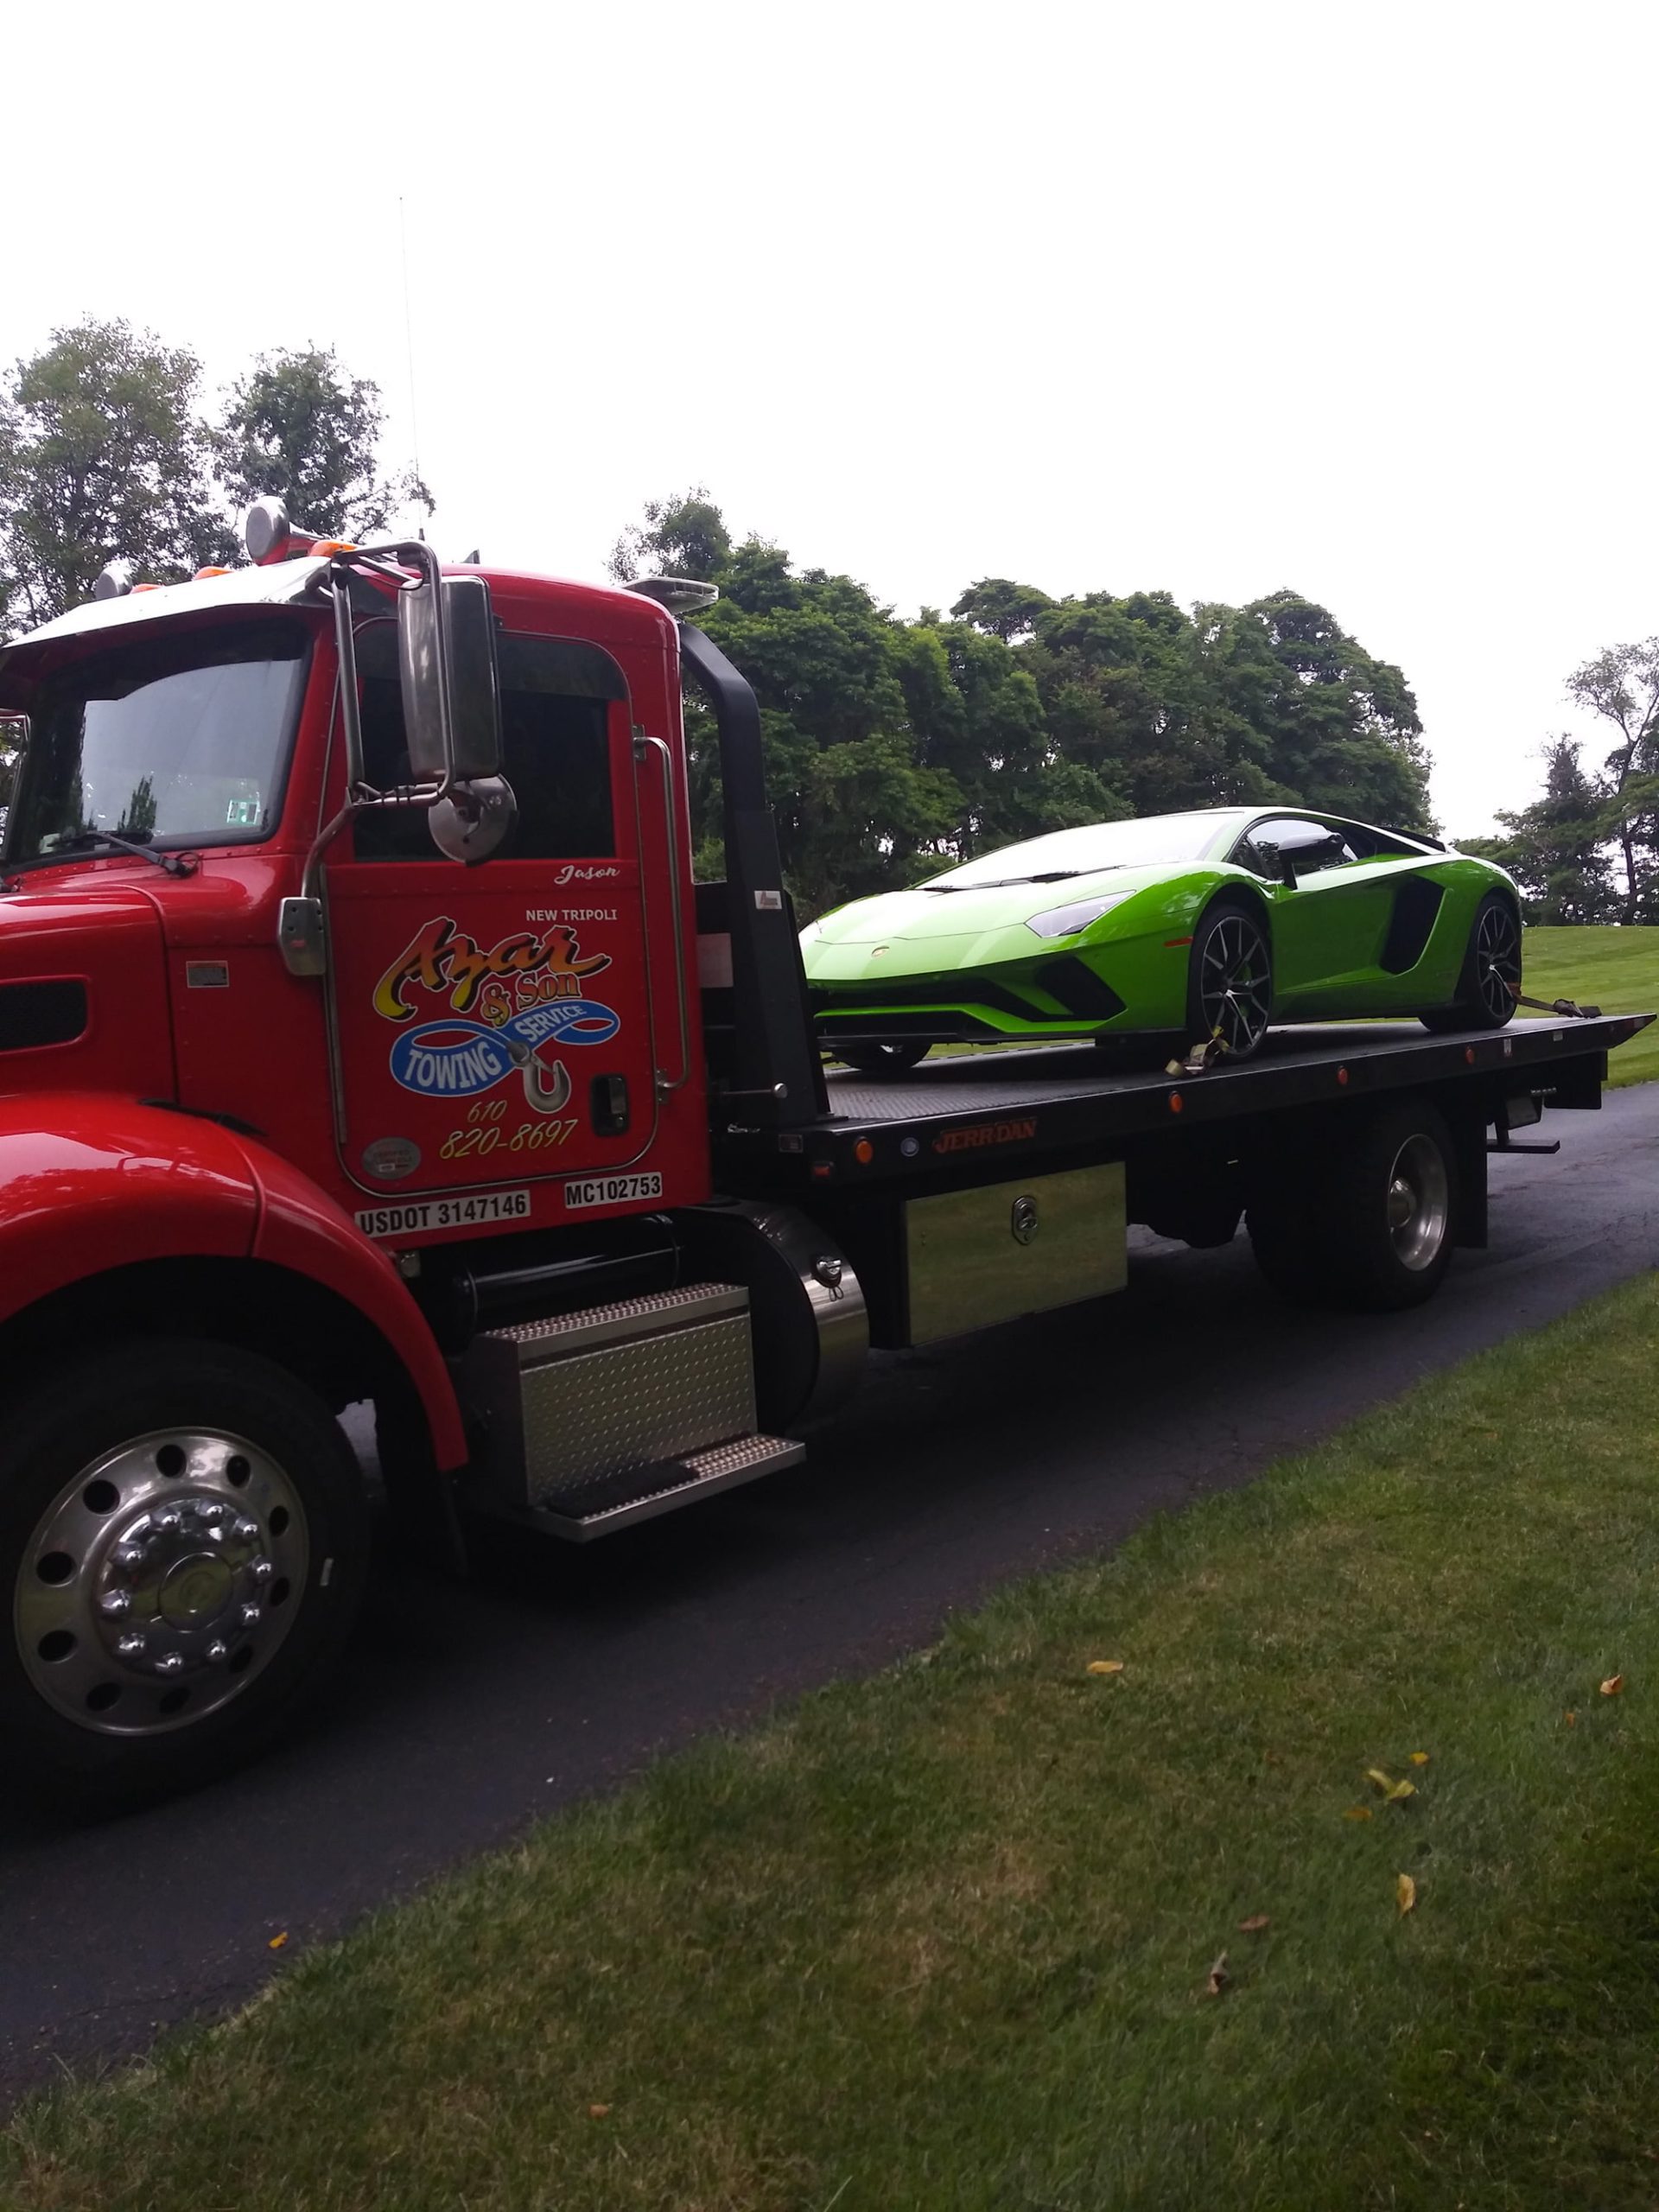 A green sports car sits on a red-cabbed Azar tow truck